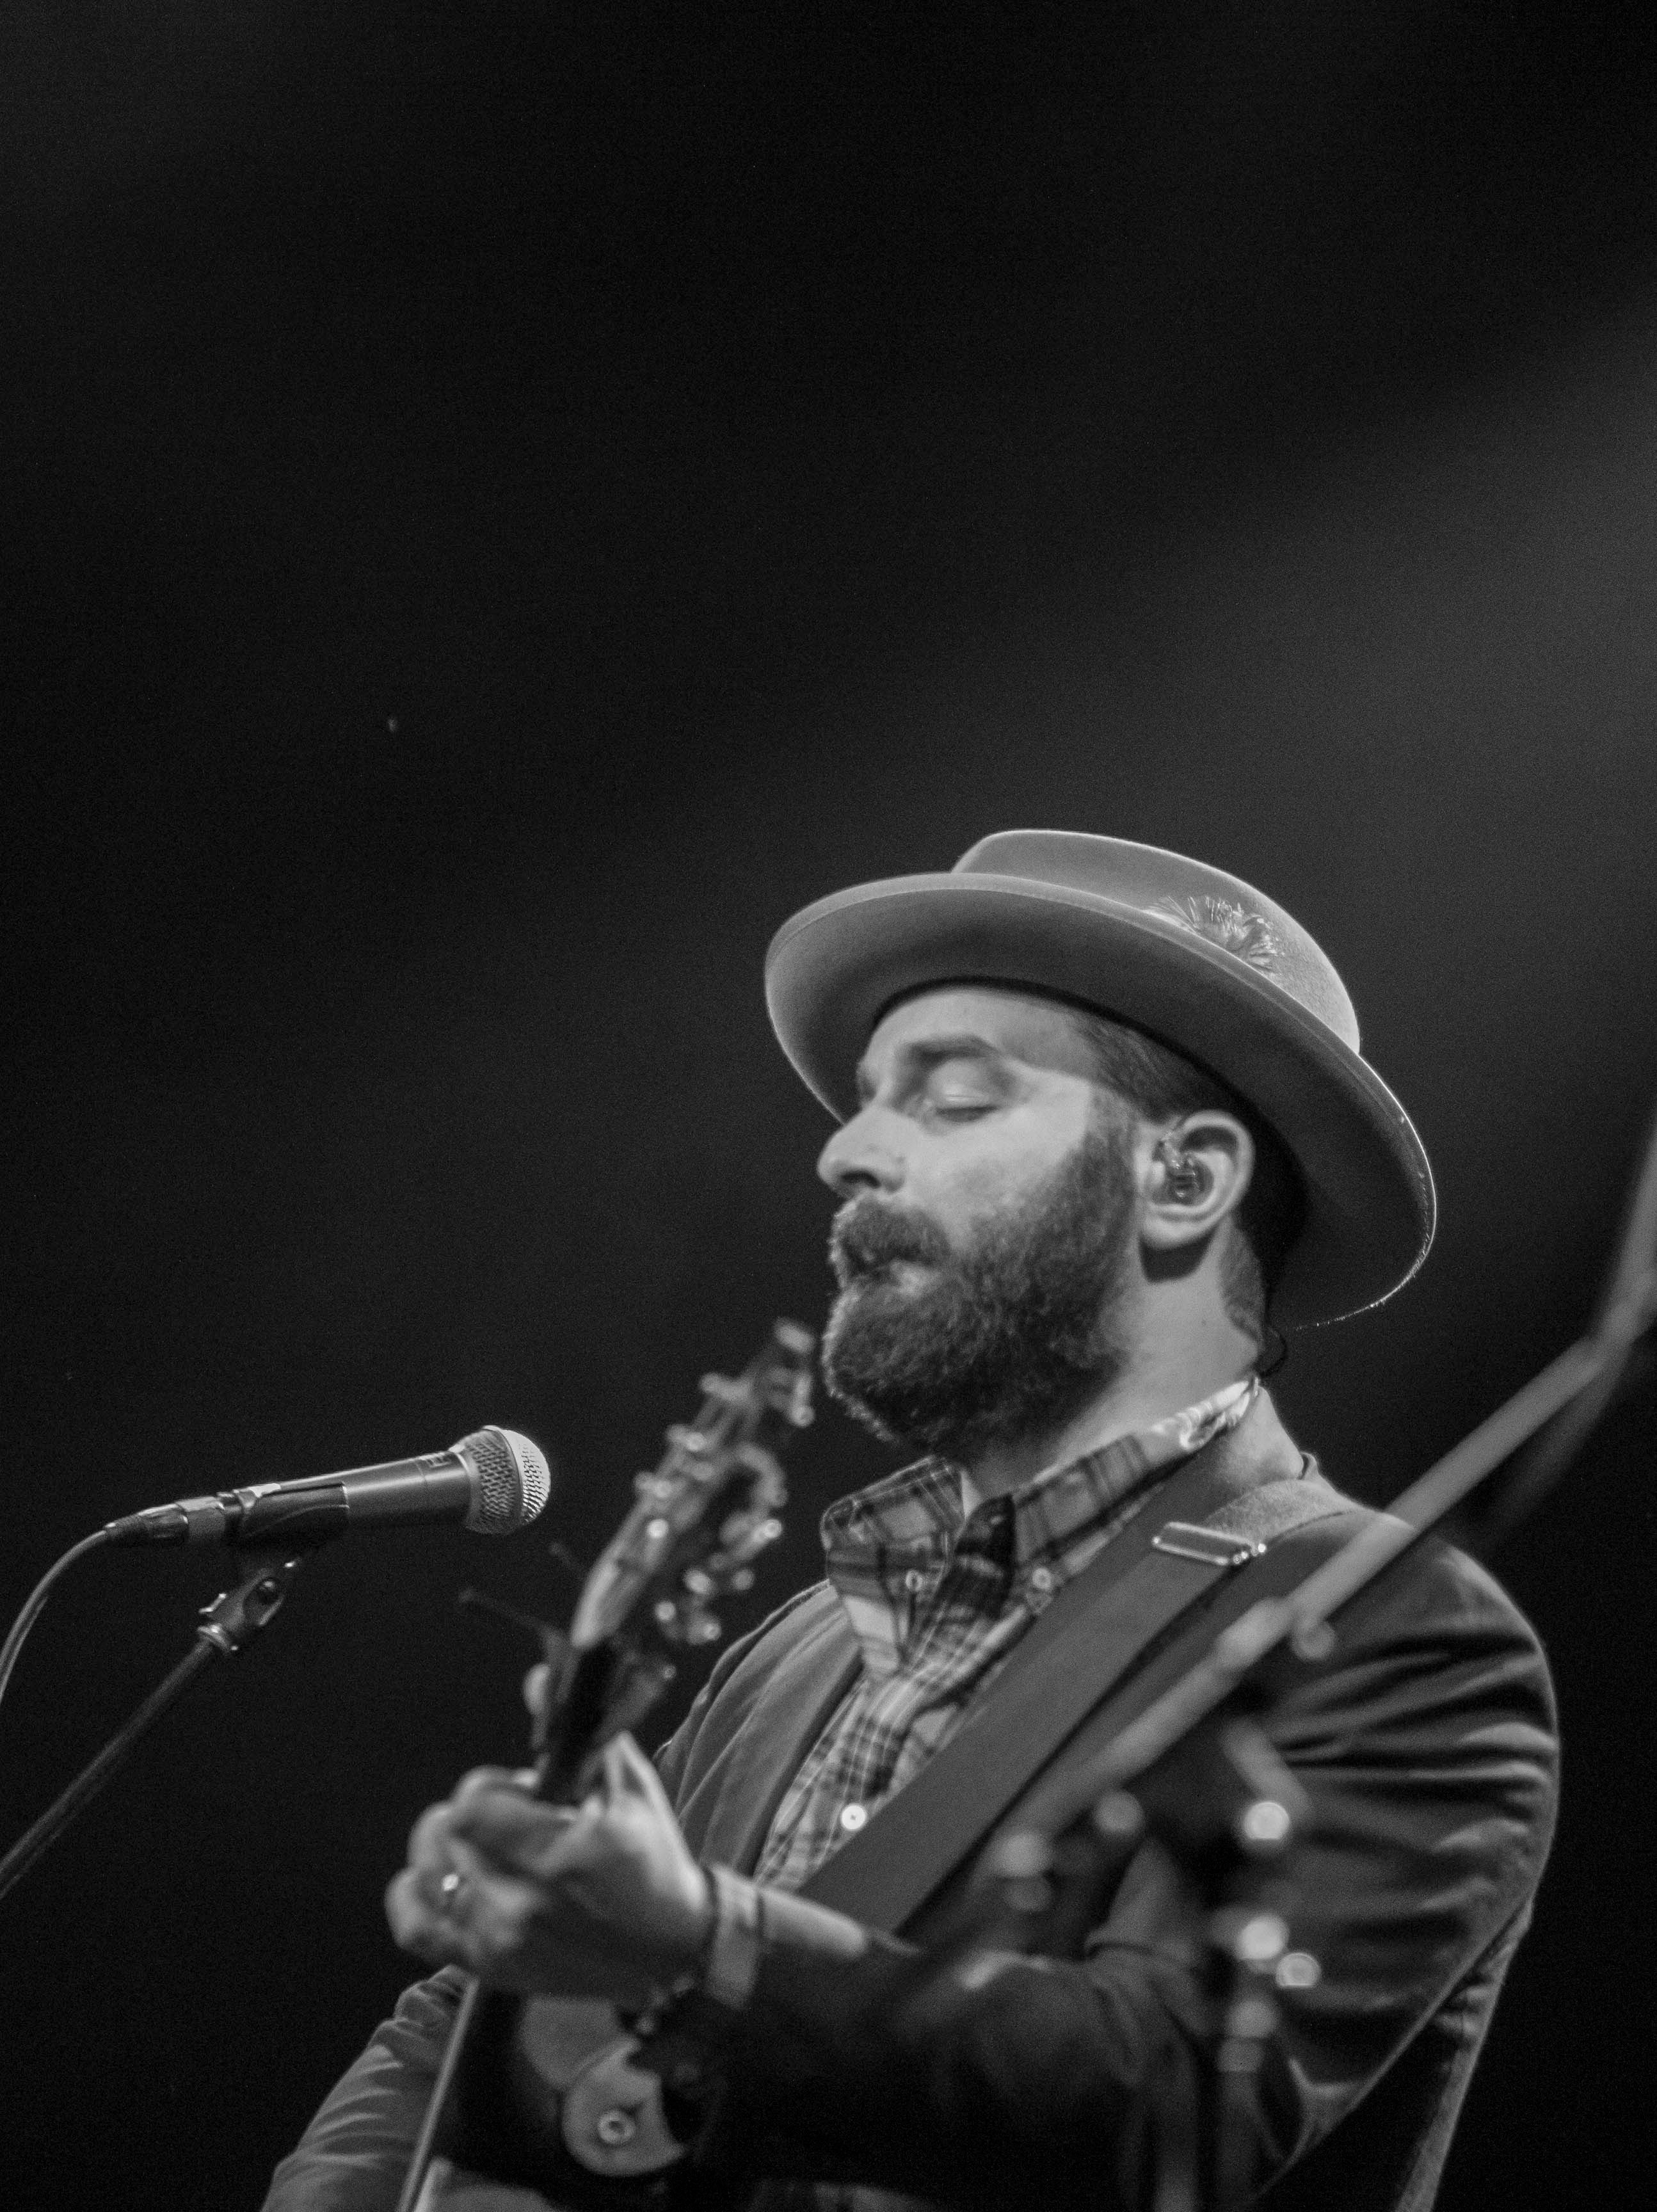 Drew Holcomb & The Neighbors with Jill Andrews @ The Sinclair 4/8